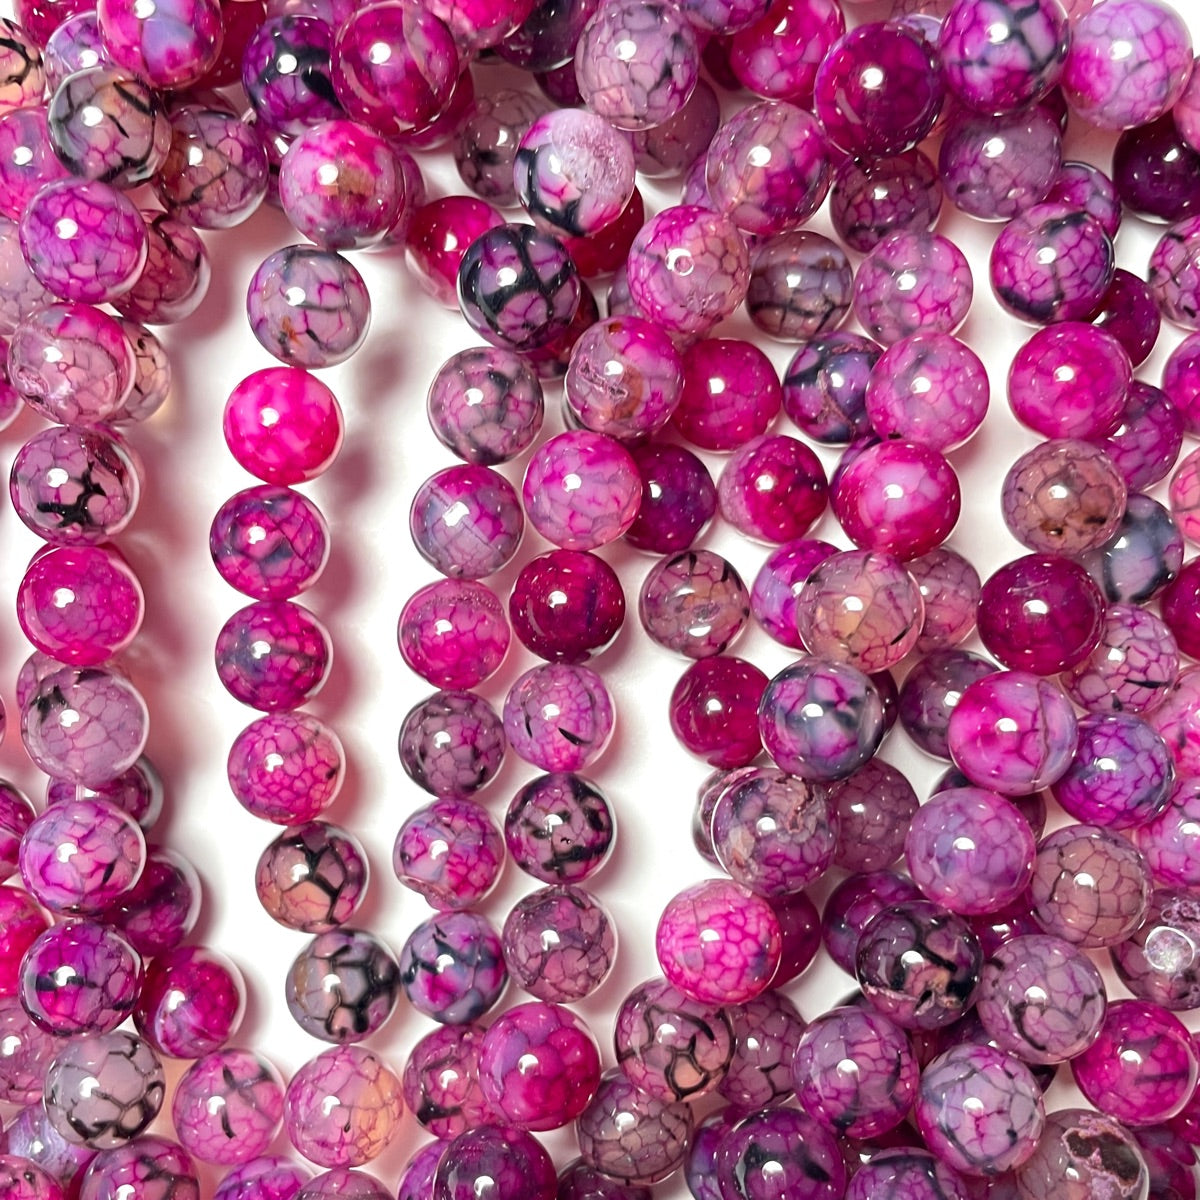 2 Strands/lot 10mm Green, Hot Pink/Fuchsia, Purple, Blue, Orange, Multicolor Dragon Agate Round Stone Beads Fuchsia Stone Beads New Beads Arrivals Round Agate Beads Charms Beads Beyond